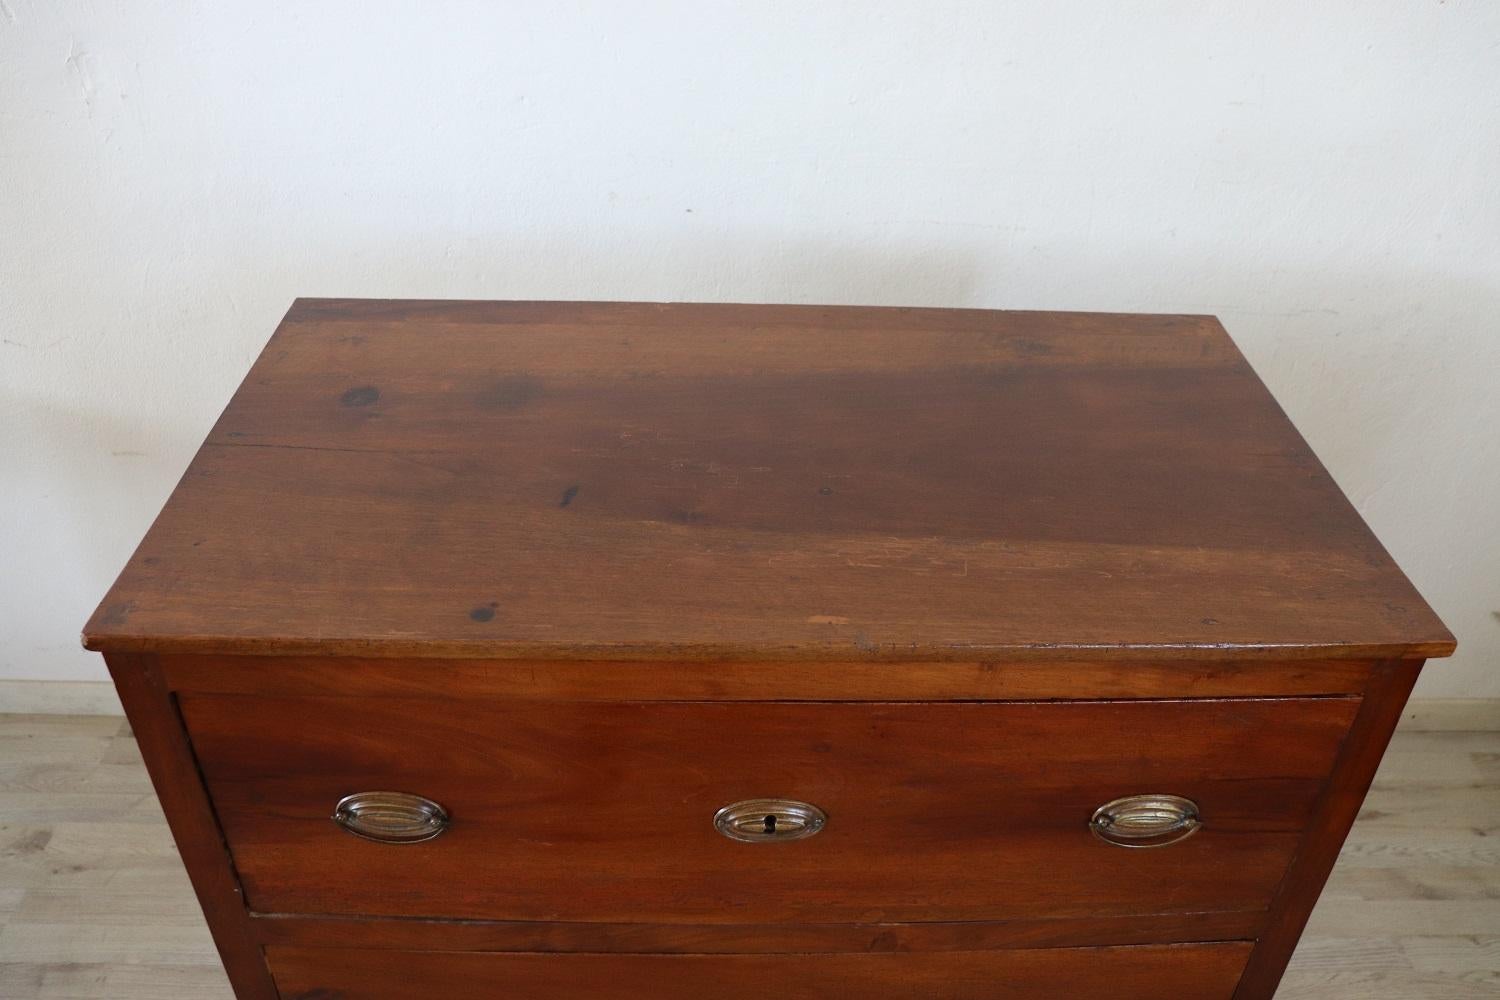 Rare and fine quality Italian Louis XVI 1780s small chest of drawers in solid walnut wood. On the front two comfortable large drawers. In good antique conditions. Beautiful slender legs. Due to its small size it is perfect for any room in the house.